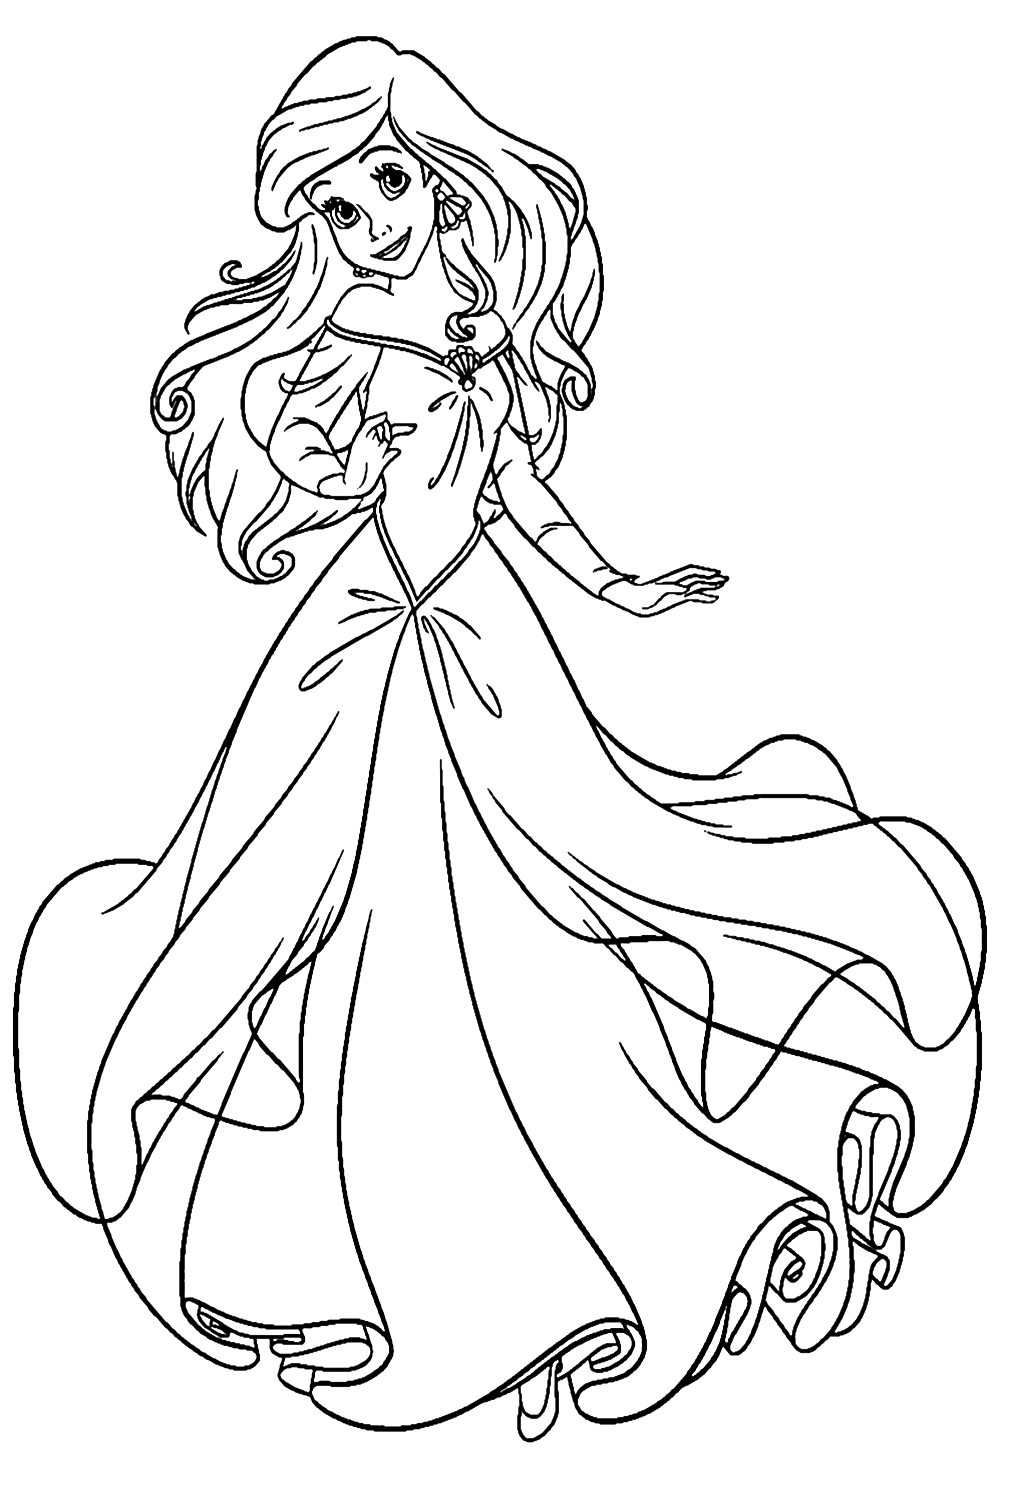 Ariel Coloring Pages - Coloring Pages For Kids And Adults